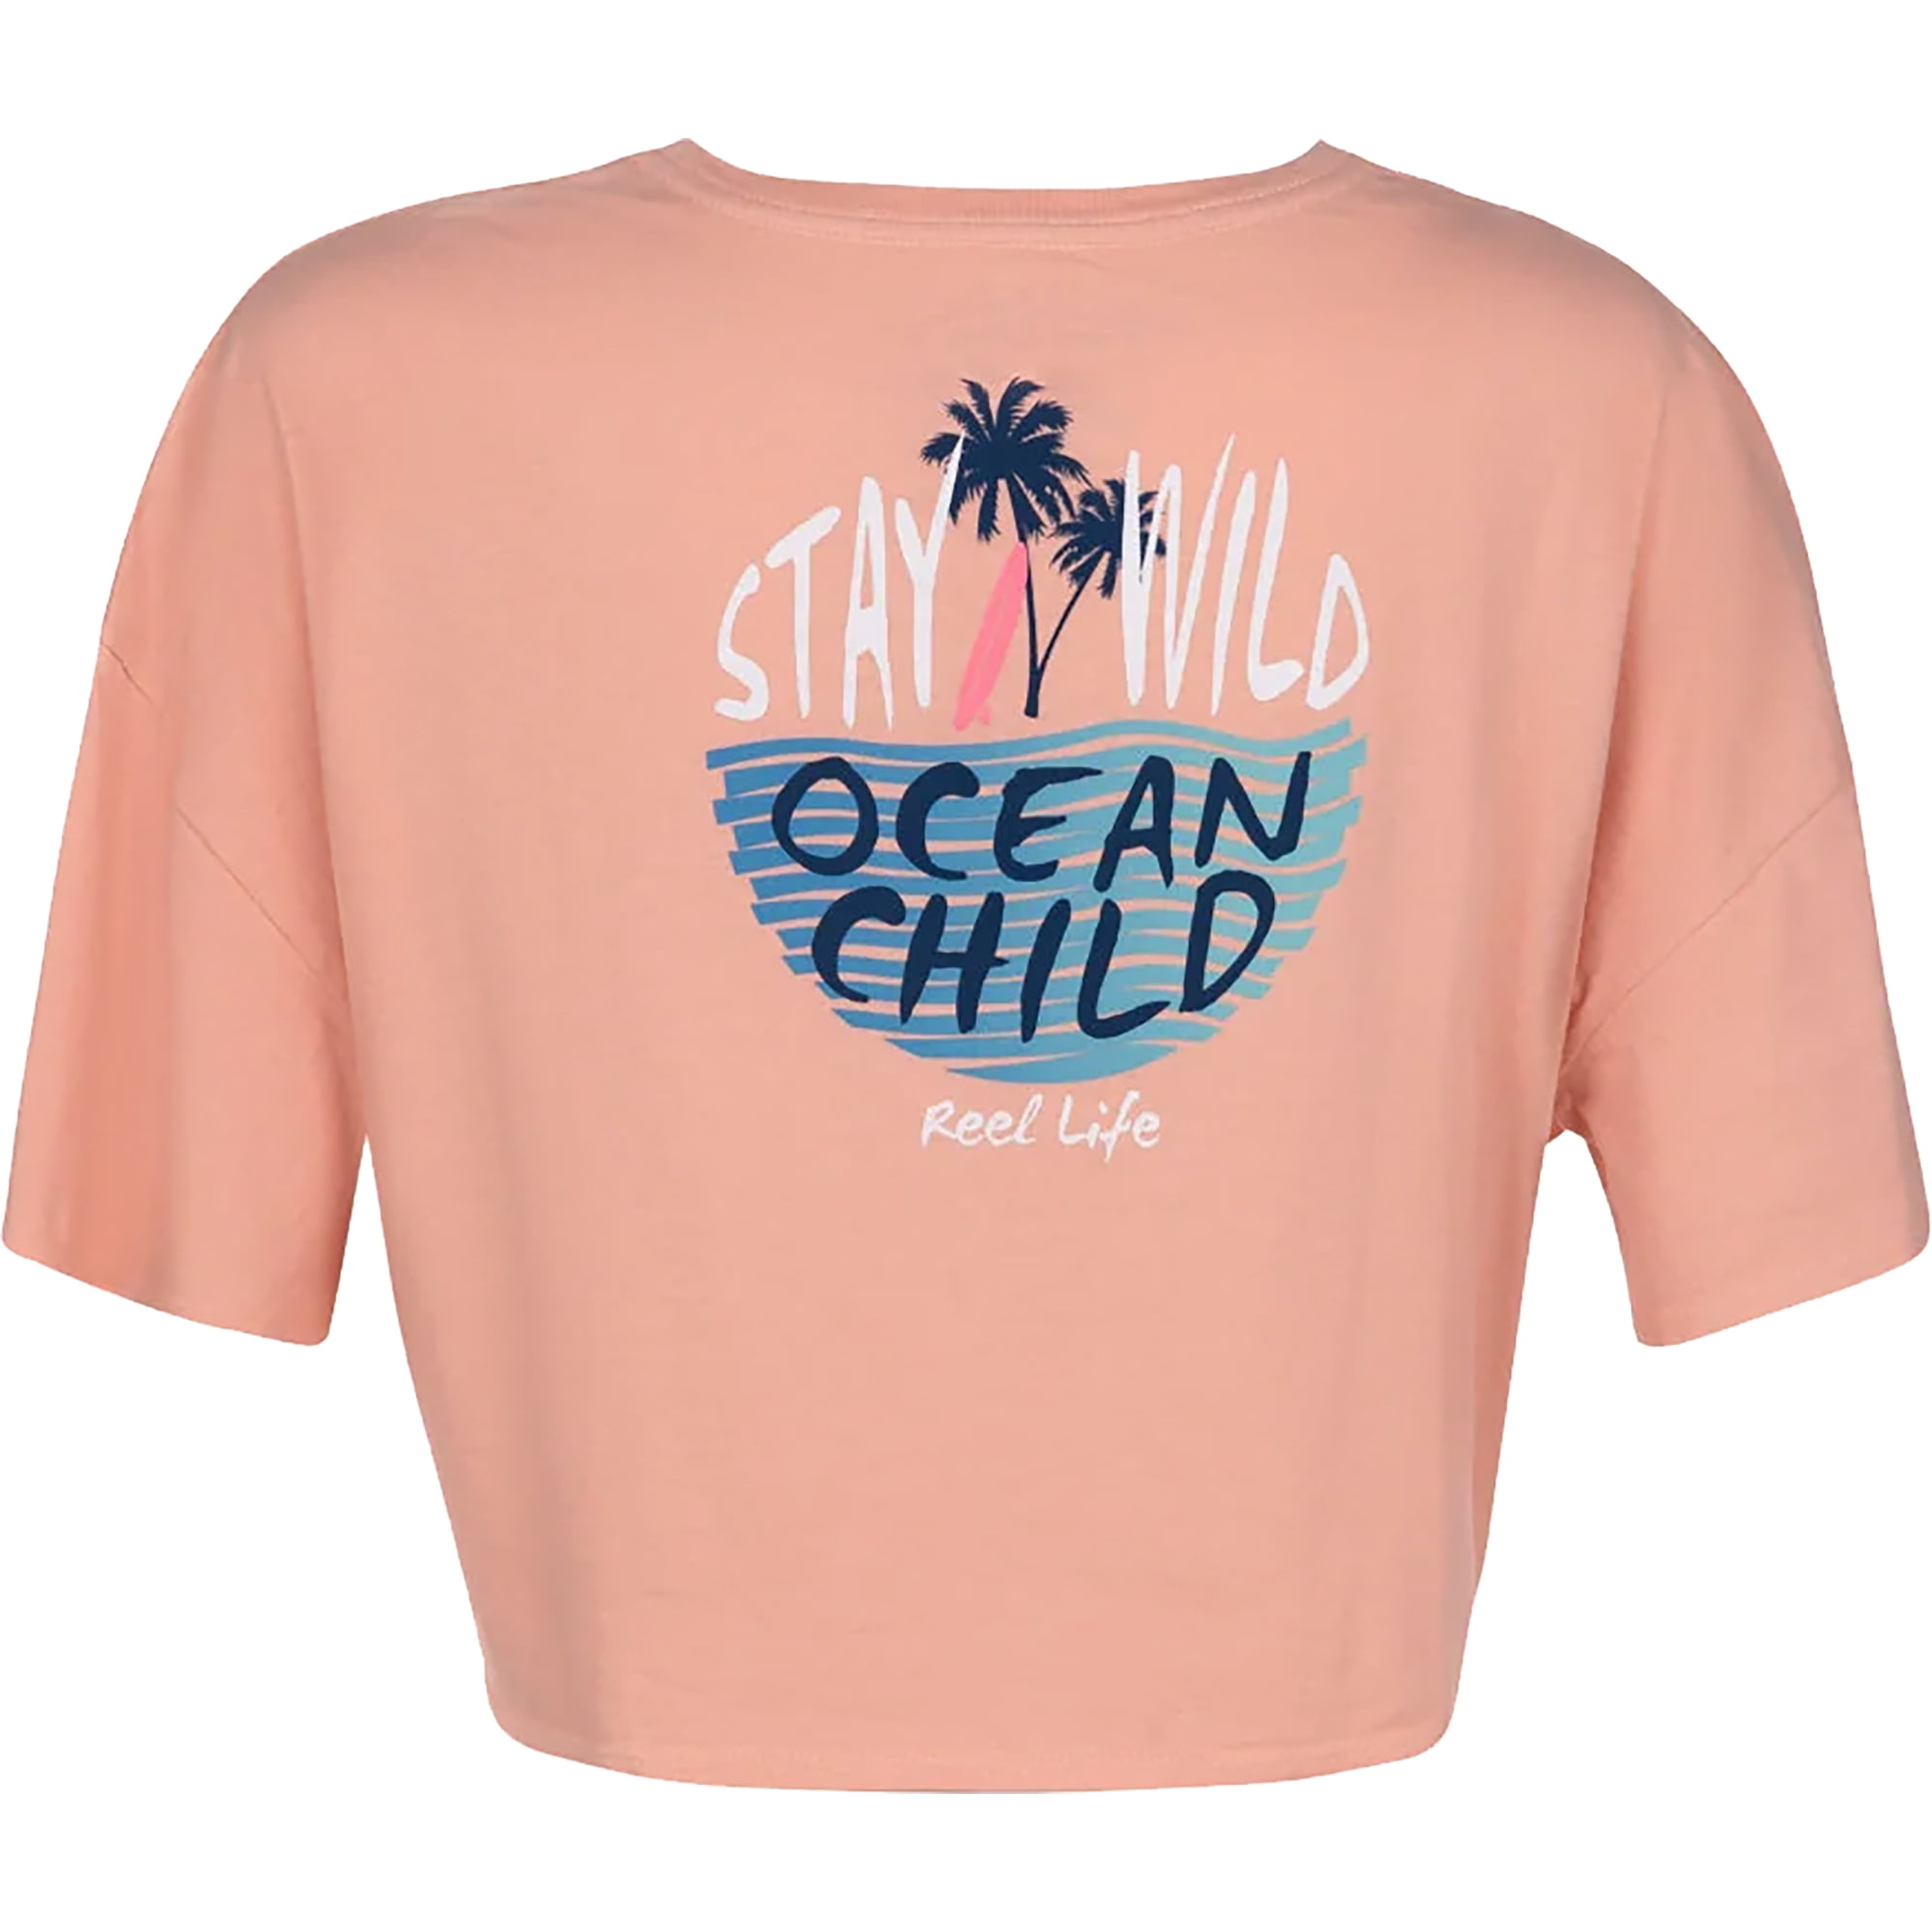 Reel Life Women's Ocean Washed Tie Front T-Shirt - 2XL - Peaches N